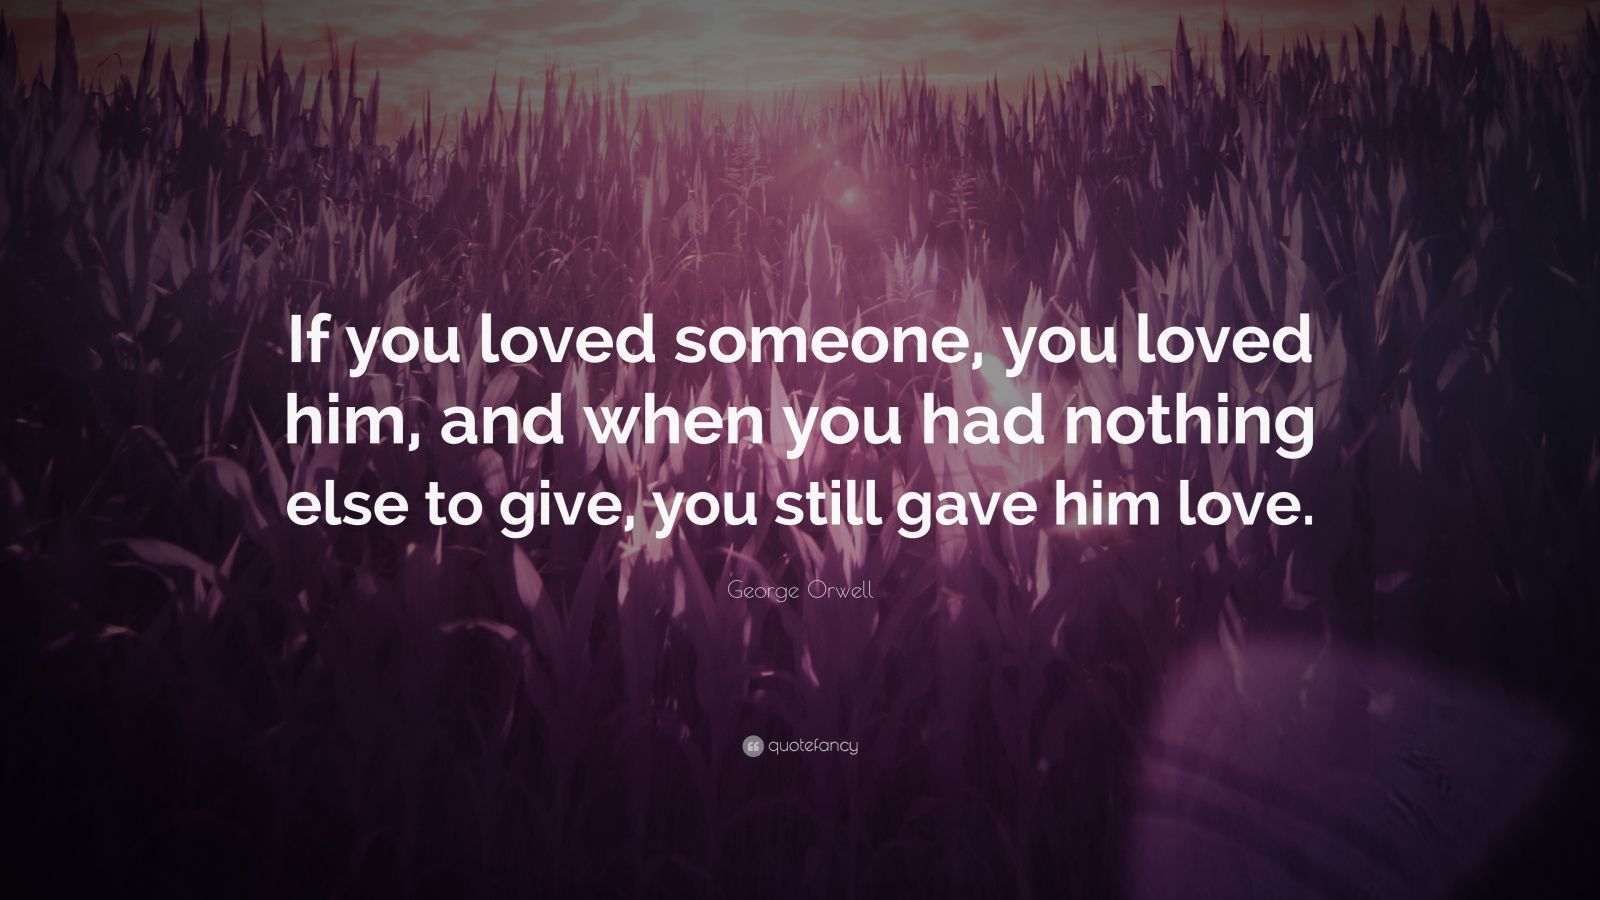 George Orwell Quote “If you loved someone you loved him and when